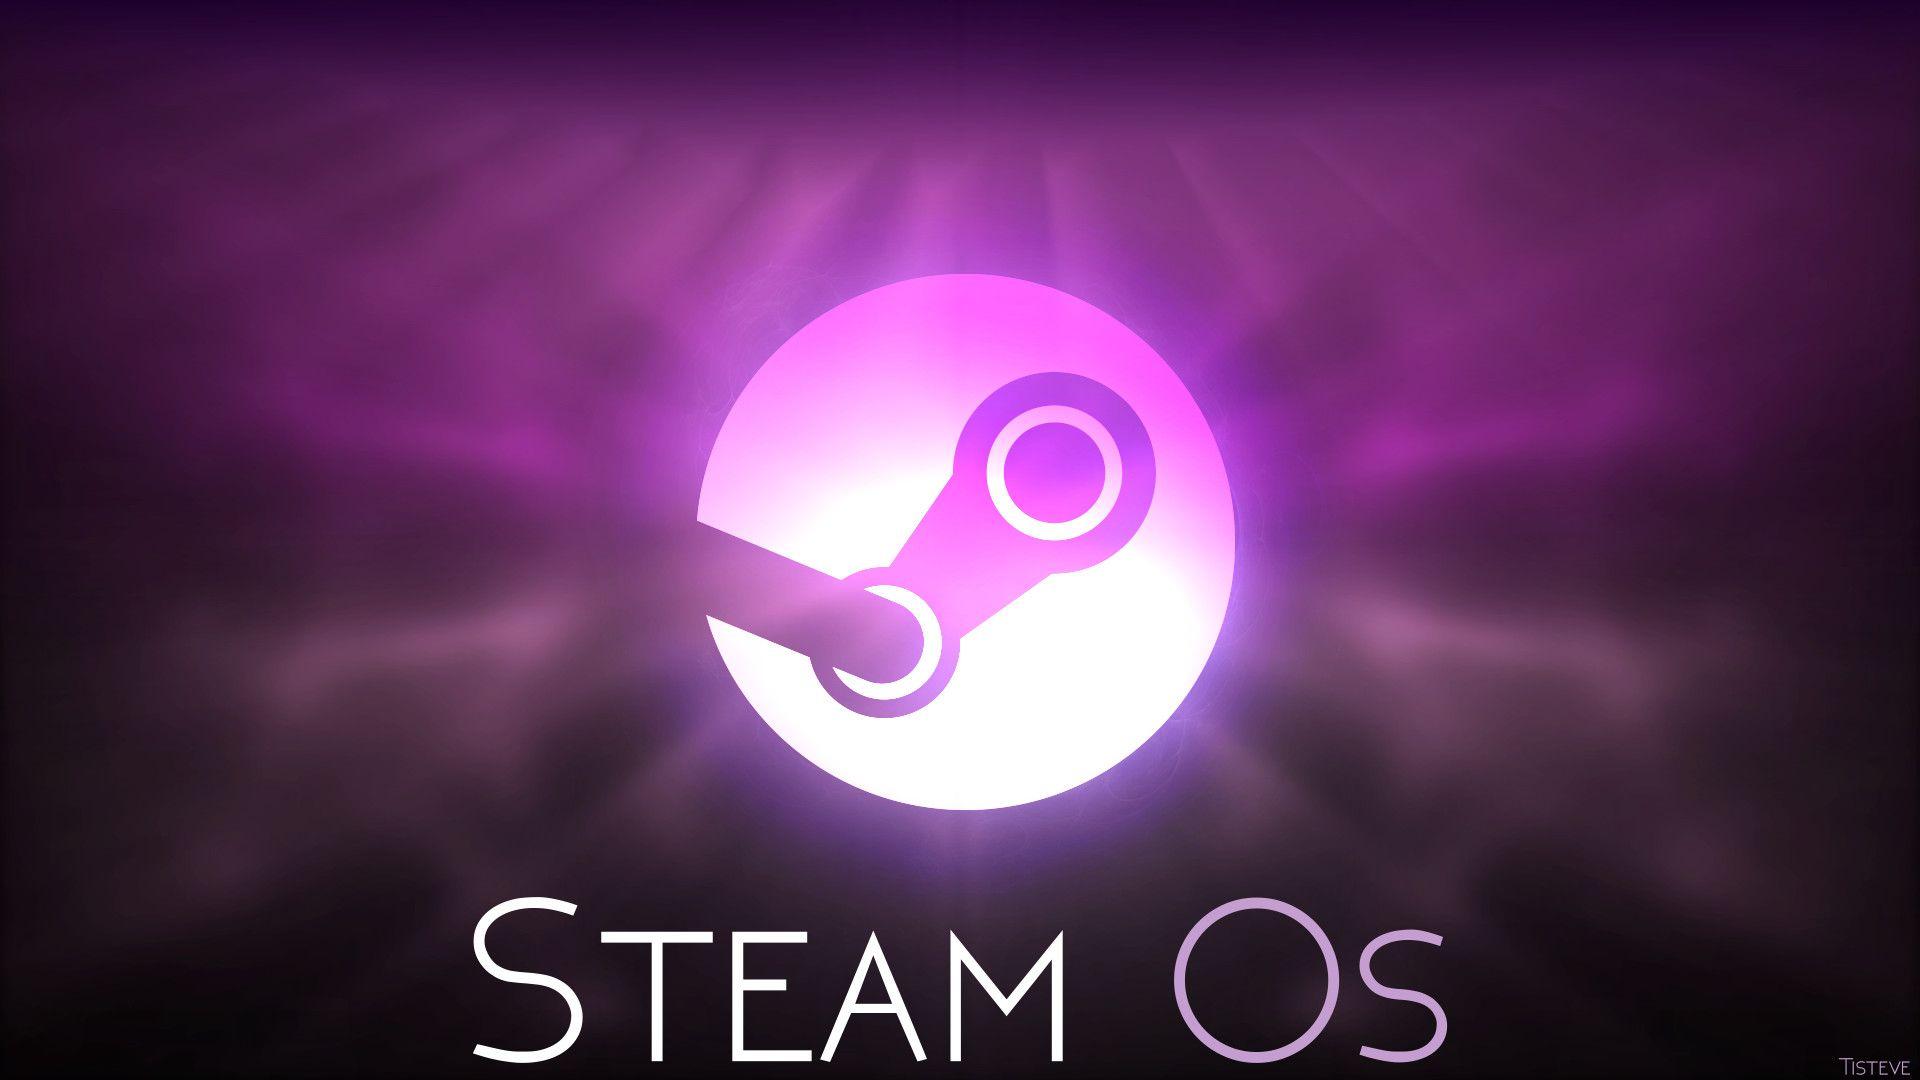 SteamOS Logo - 82+ Steam Os Wallpapers on WallpaperPlay